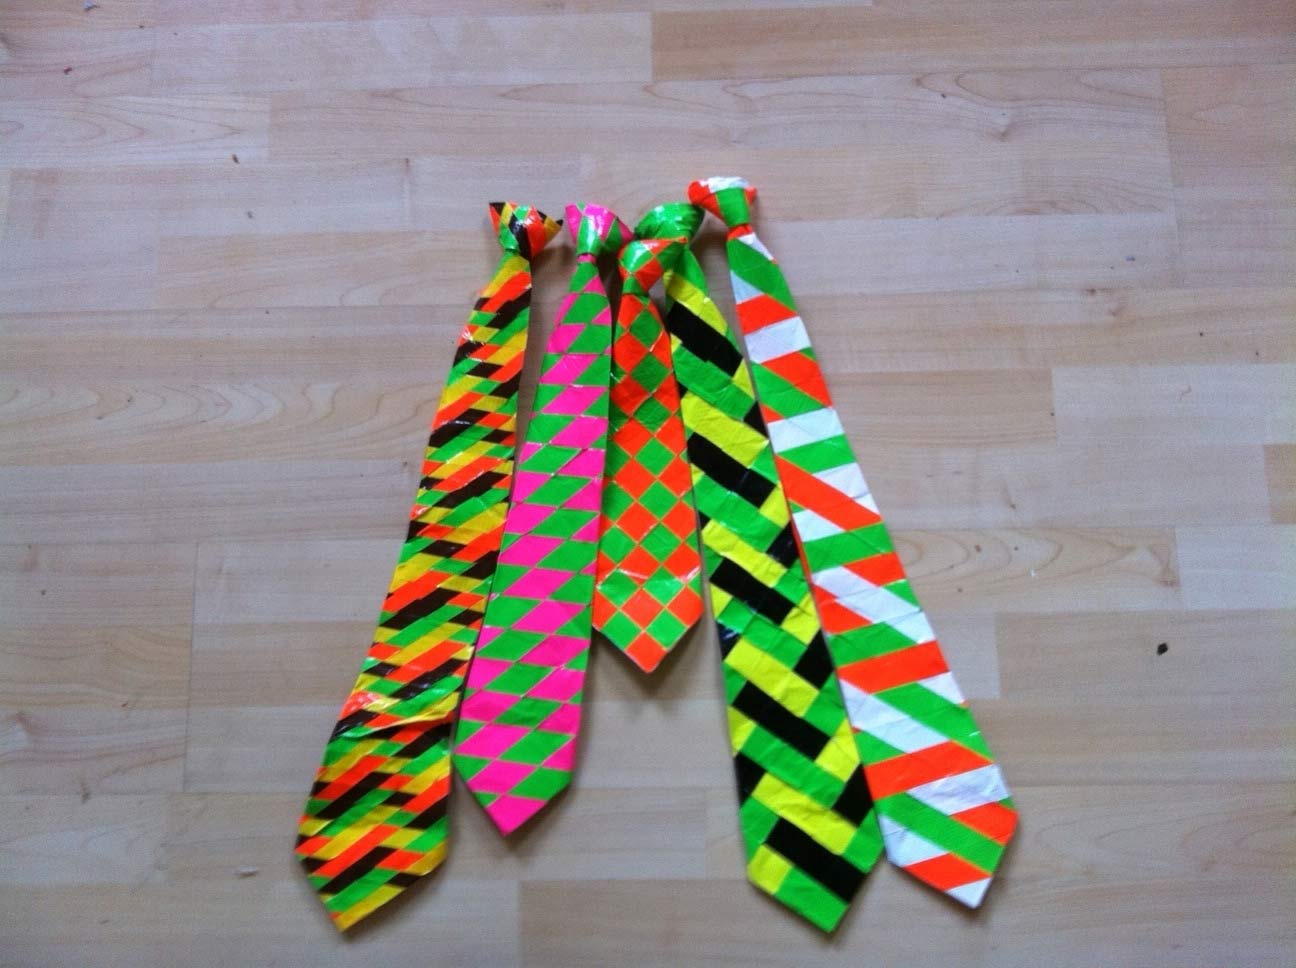 Duct Tape Crafts Ideas for DIY Home Decor, Fashion and Accessories | Duct Tape Tie | DIY Projects for Teens #teencrafts #kidscrafts #ducttape #cheapcrafts /